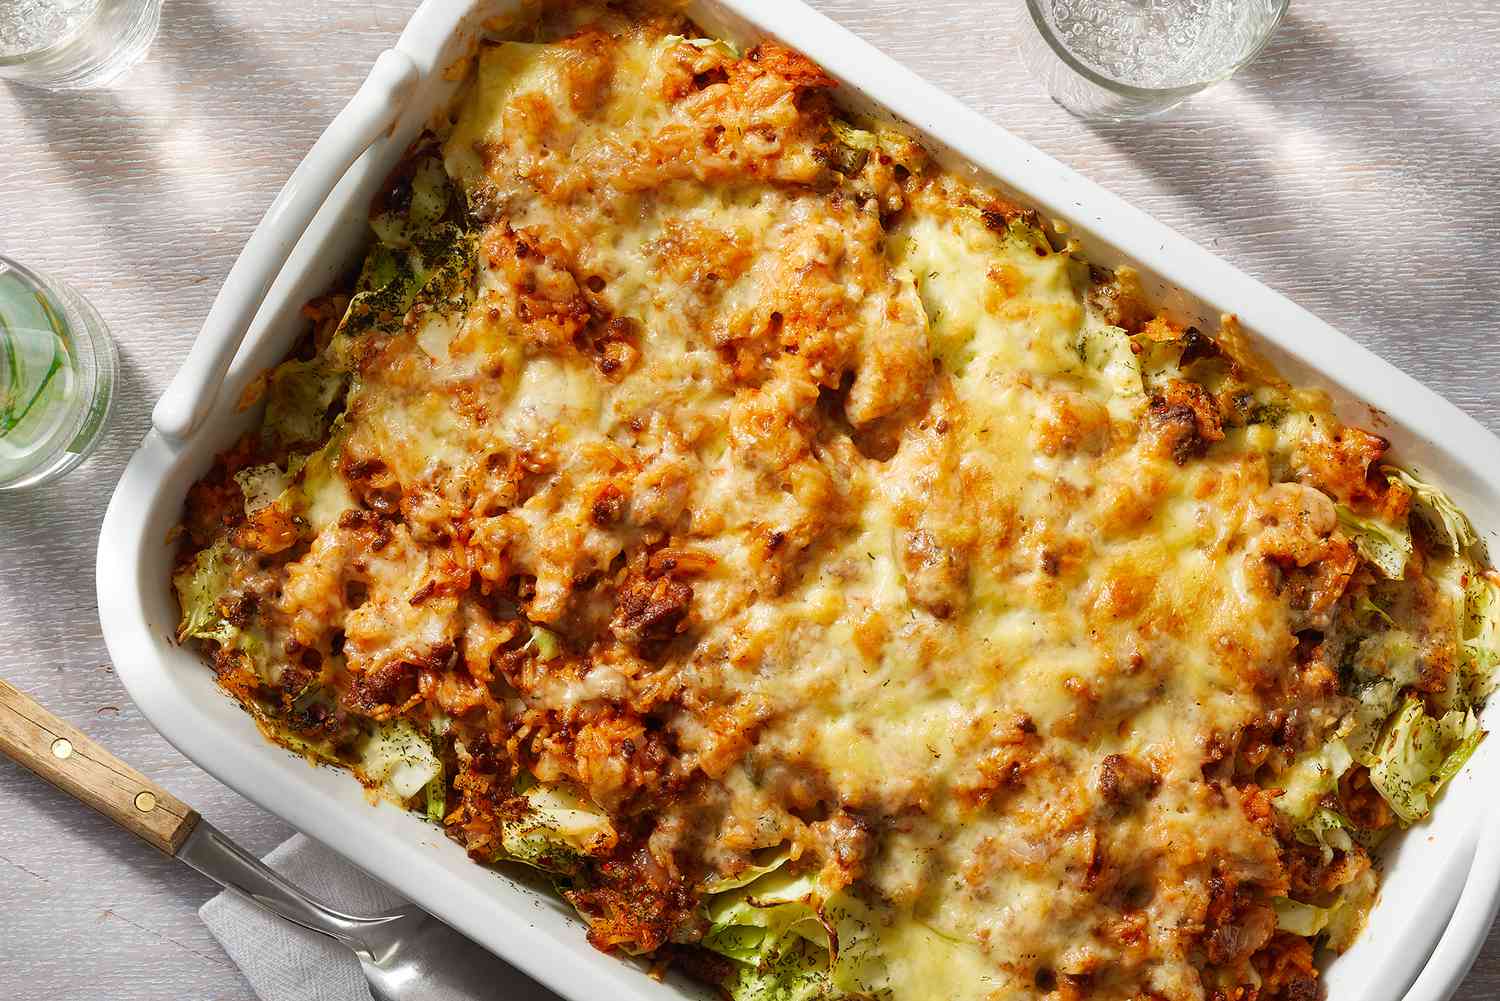 These are the 8 Most Popular Casseroles of All Time